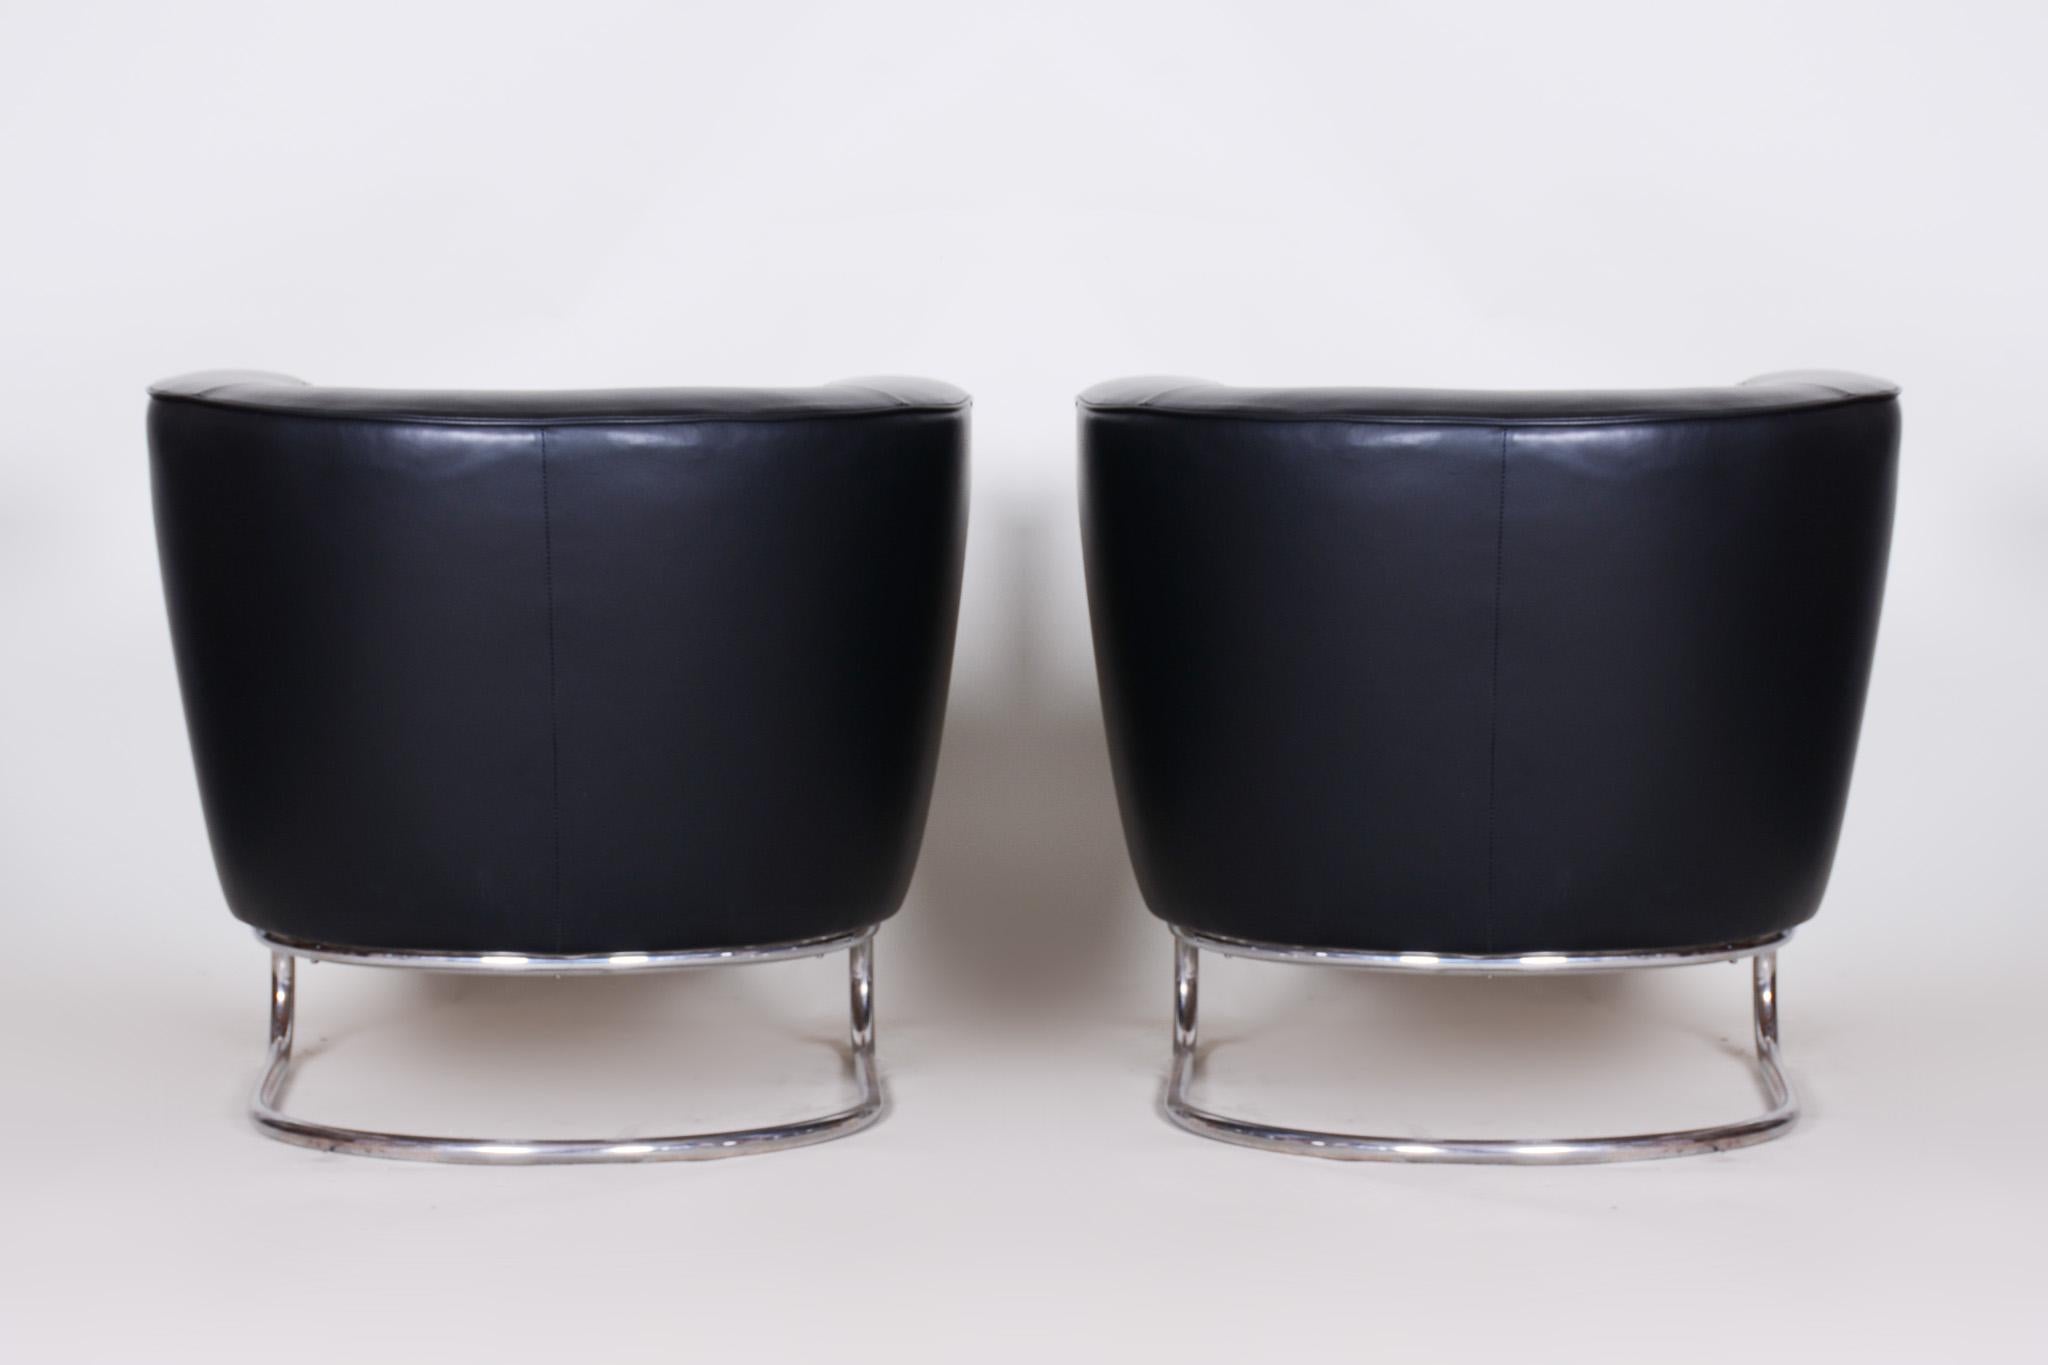 Pair of Black Art Deco Armchairs from Czechoslovakia by Jindrich Halabala, 1930s For Sale 7